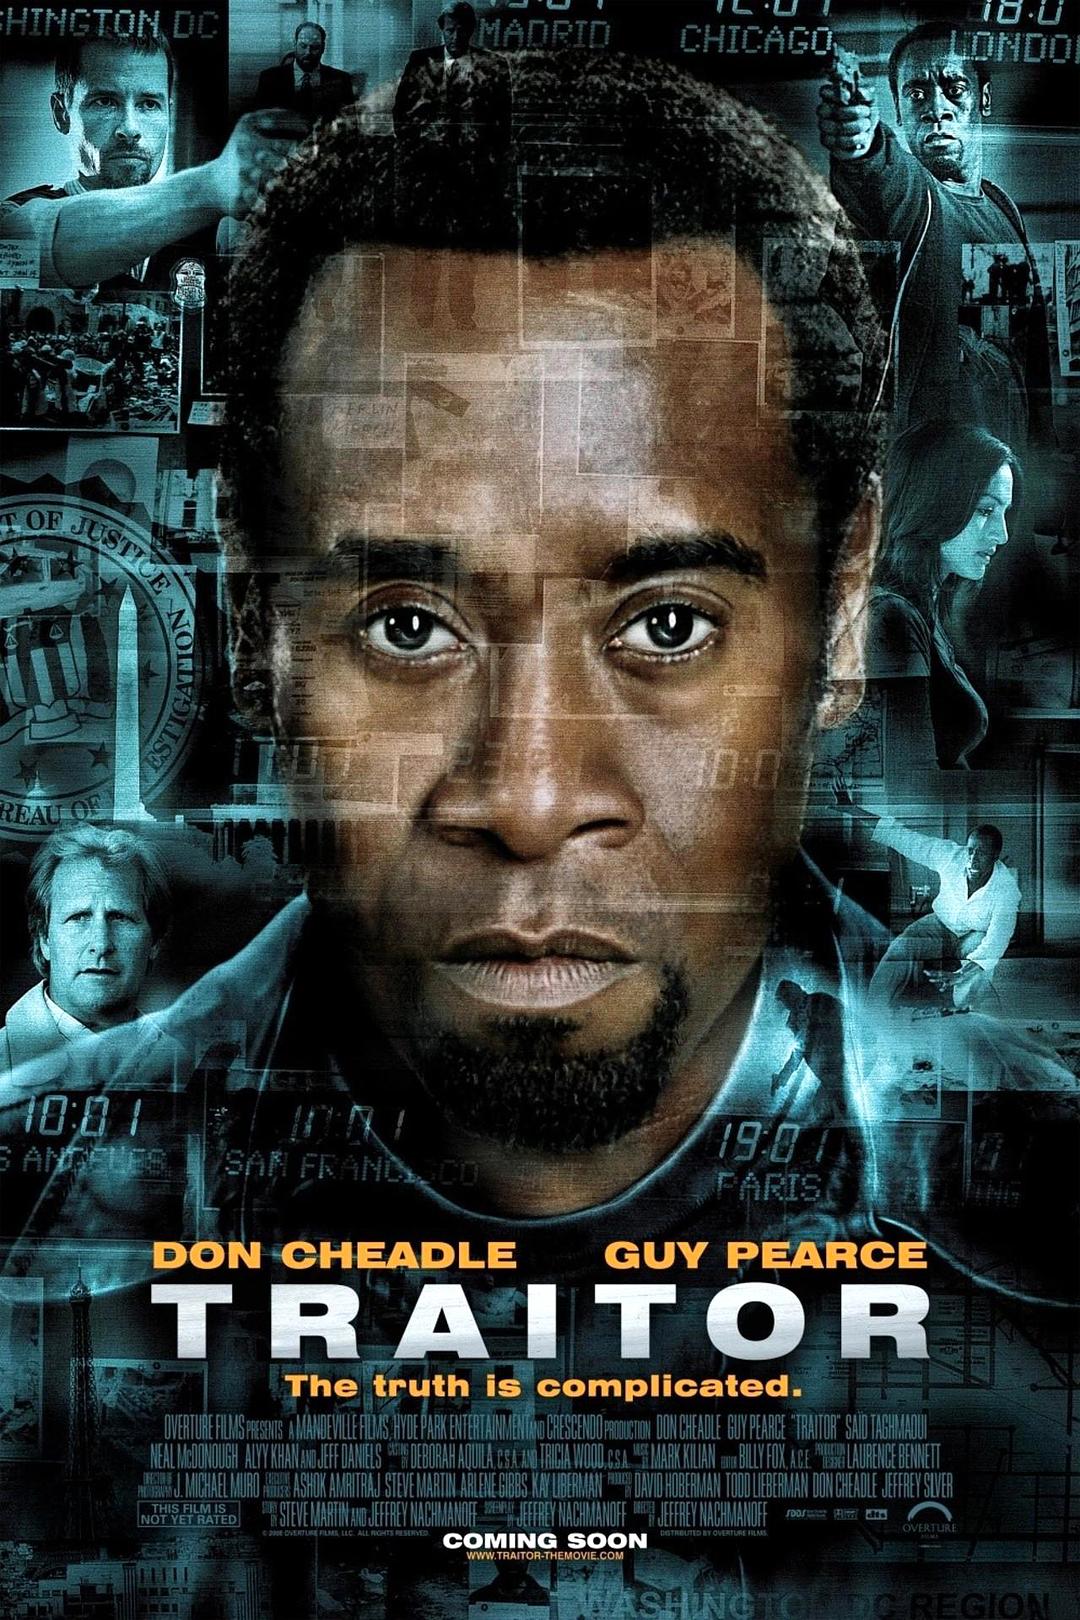 ѹ/ͽ Traitor.2007.1080p.BluRay.x264.DTS-FGT 6.58GB-1.png